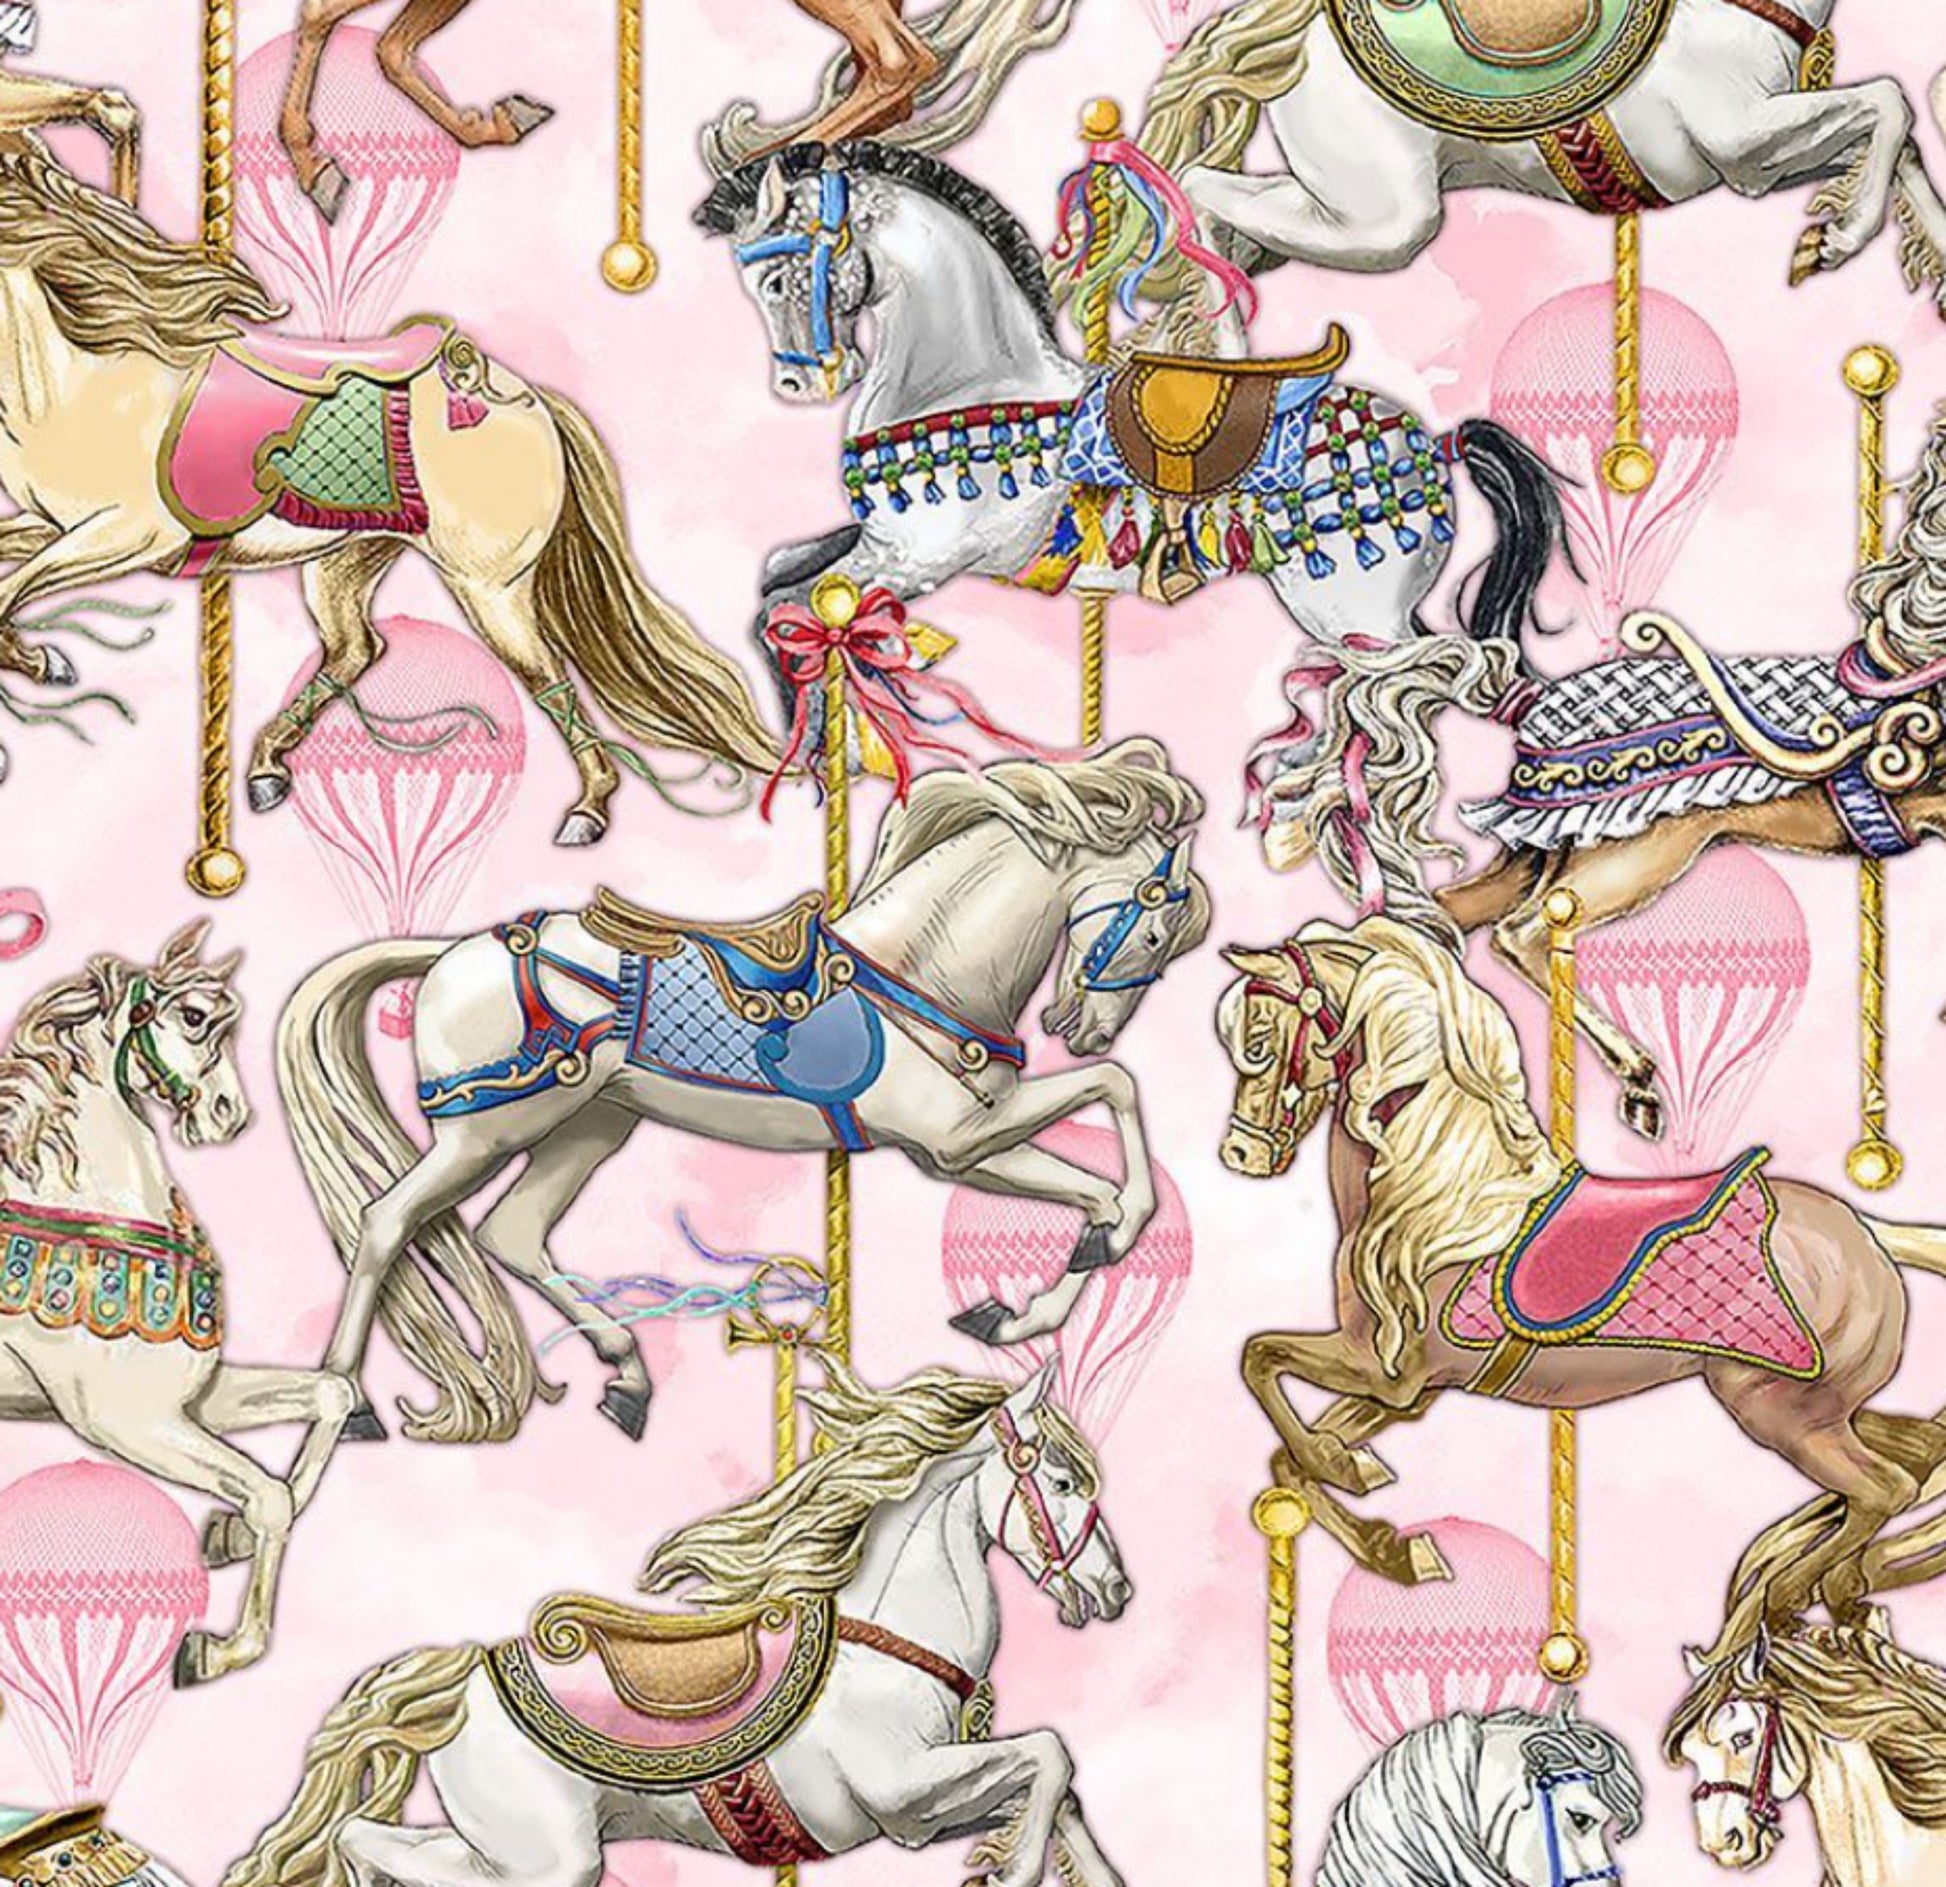 Carousel Horses Fabric in Pink from the Admit One Collection by Timeless Treasures